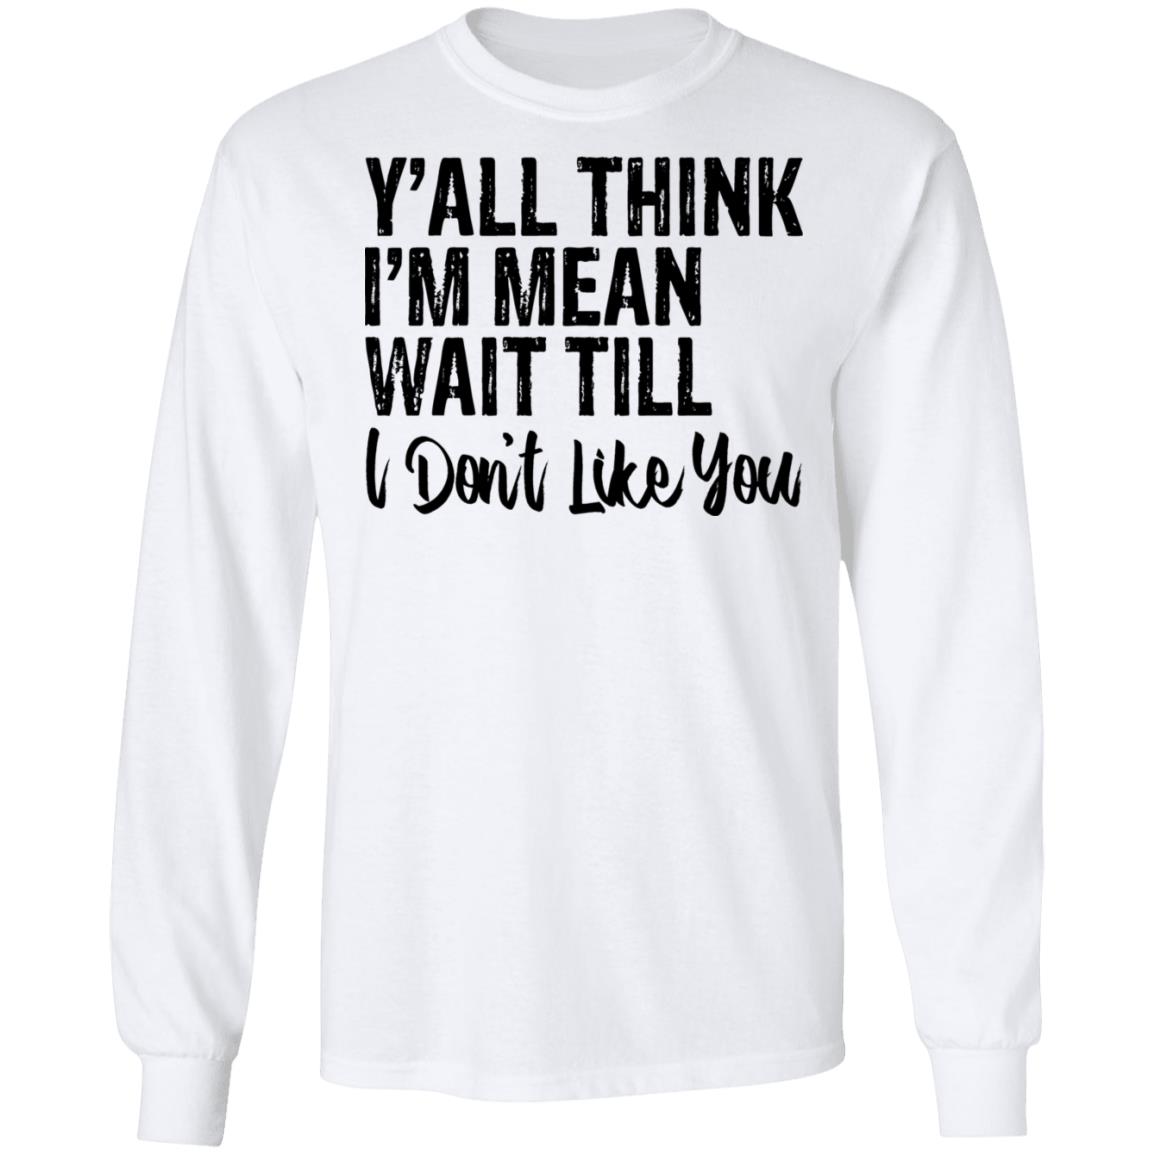 Y’all Think I’m Mean Wait Till Don’t Like You Shirt | Teemoonley.com